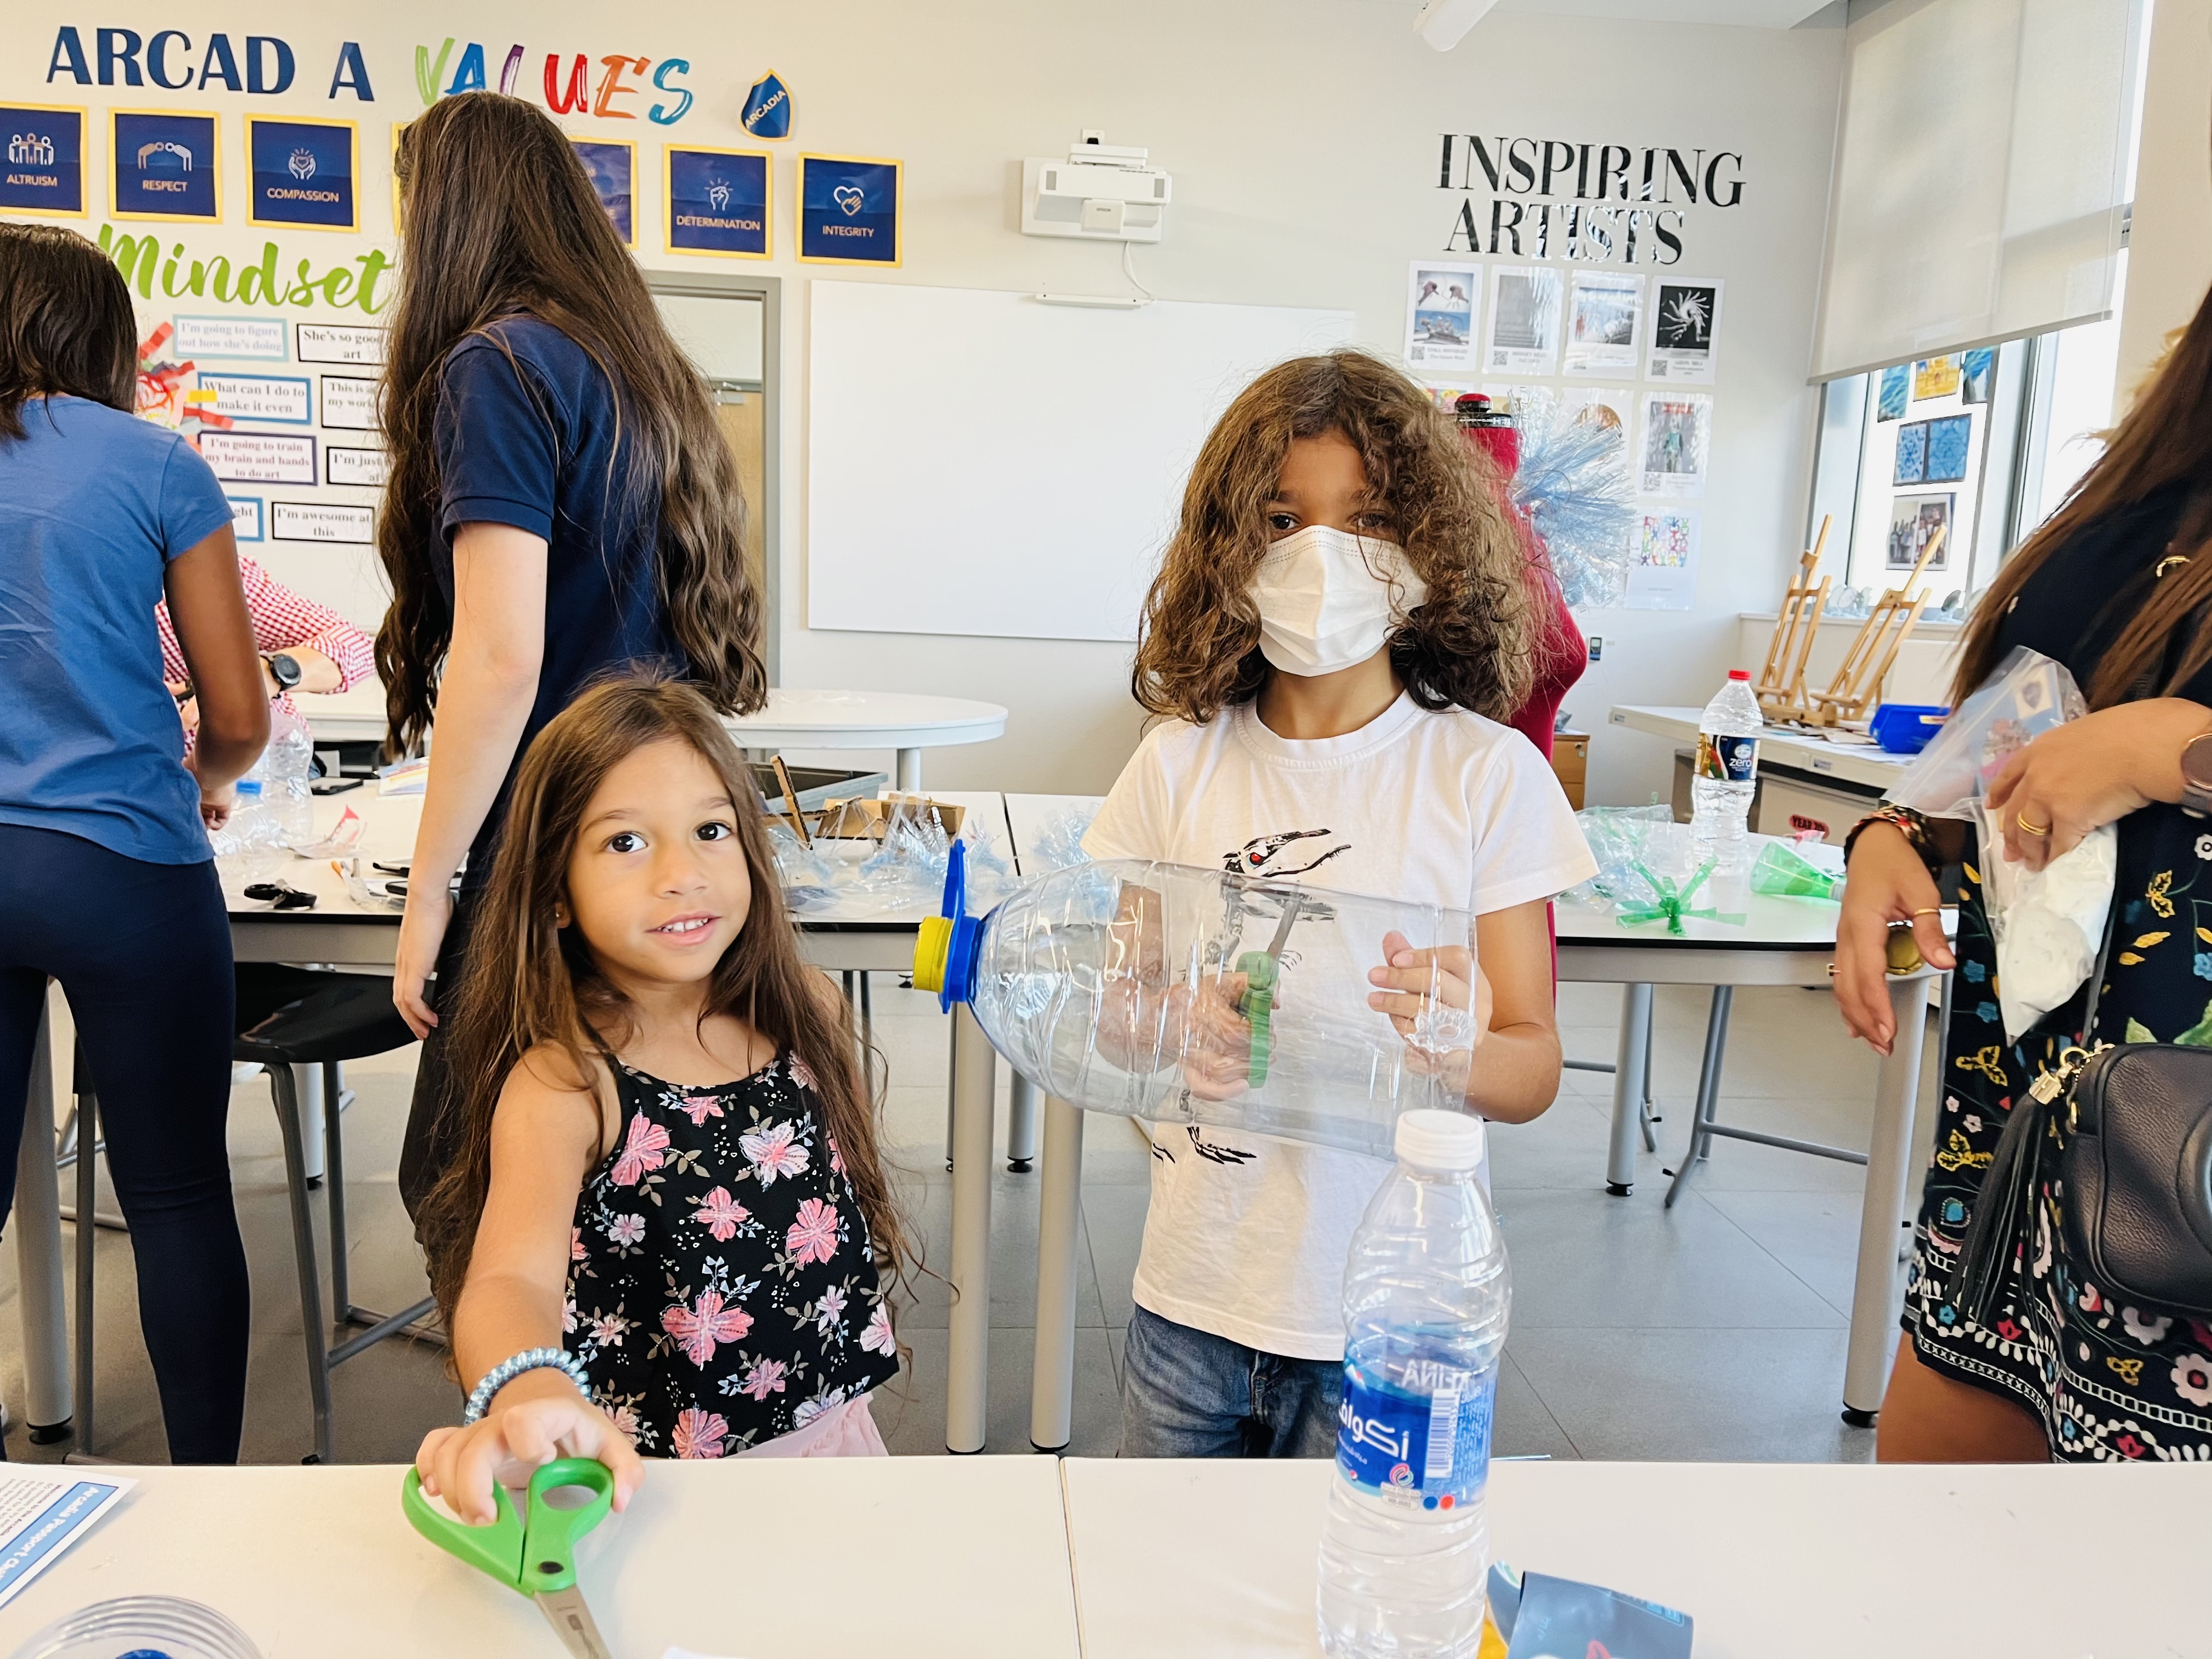 A photograph of budding artists at the Festival of Schools event in Arcadia School